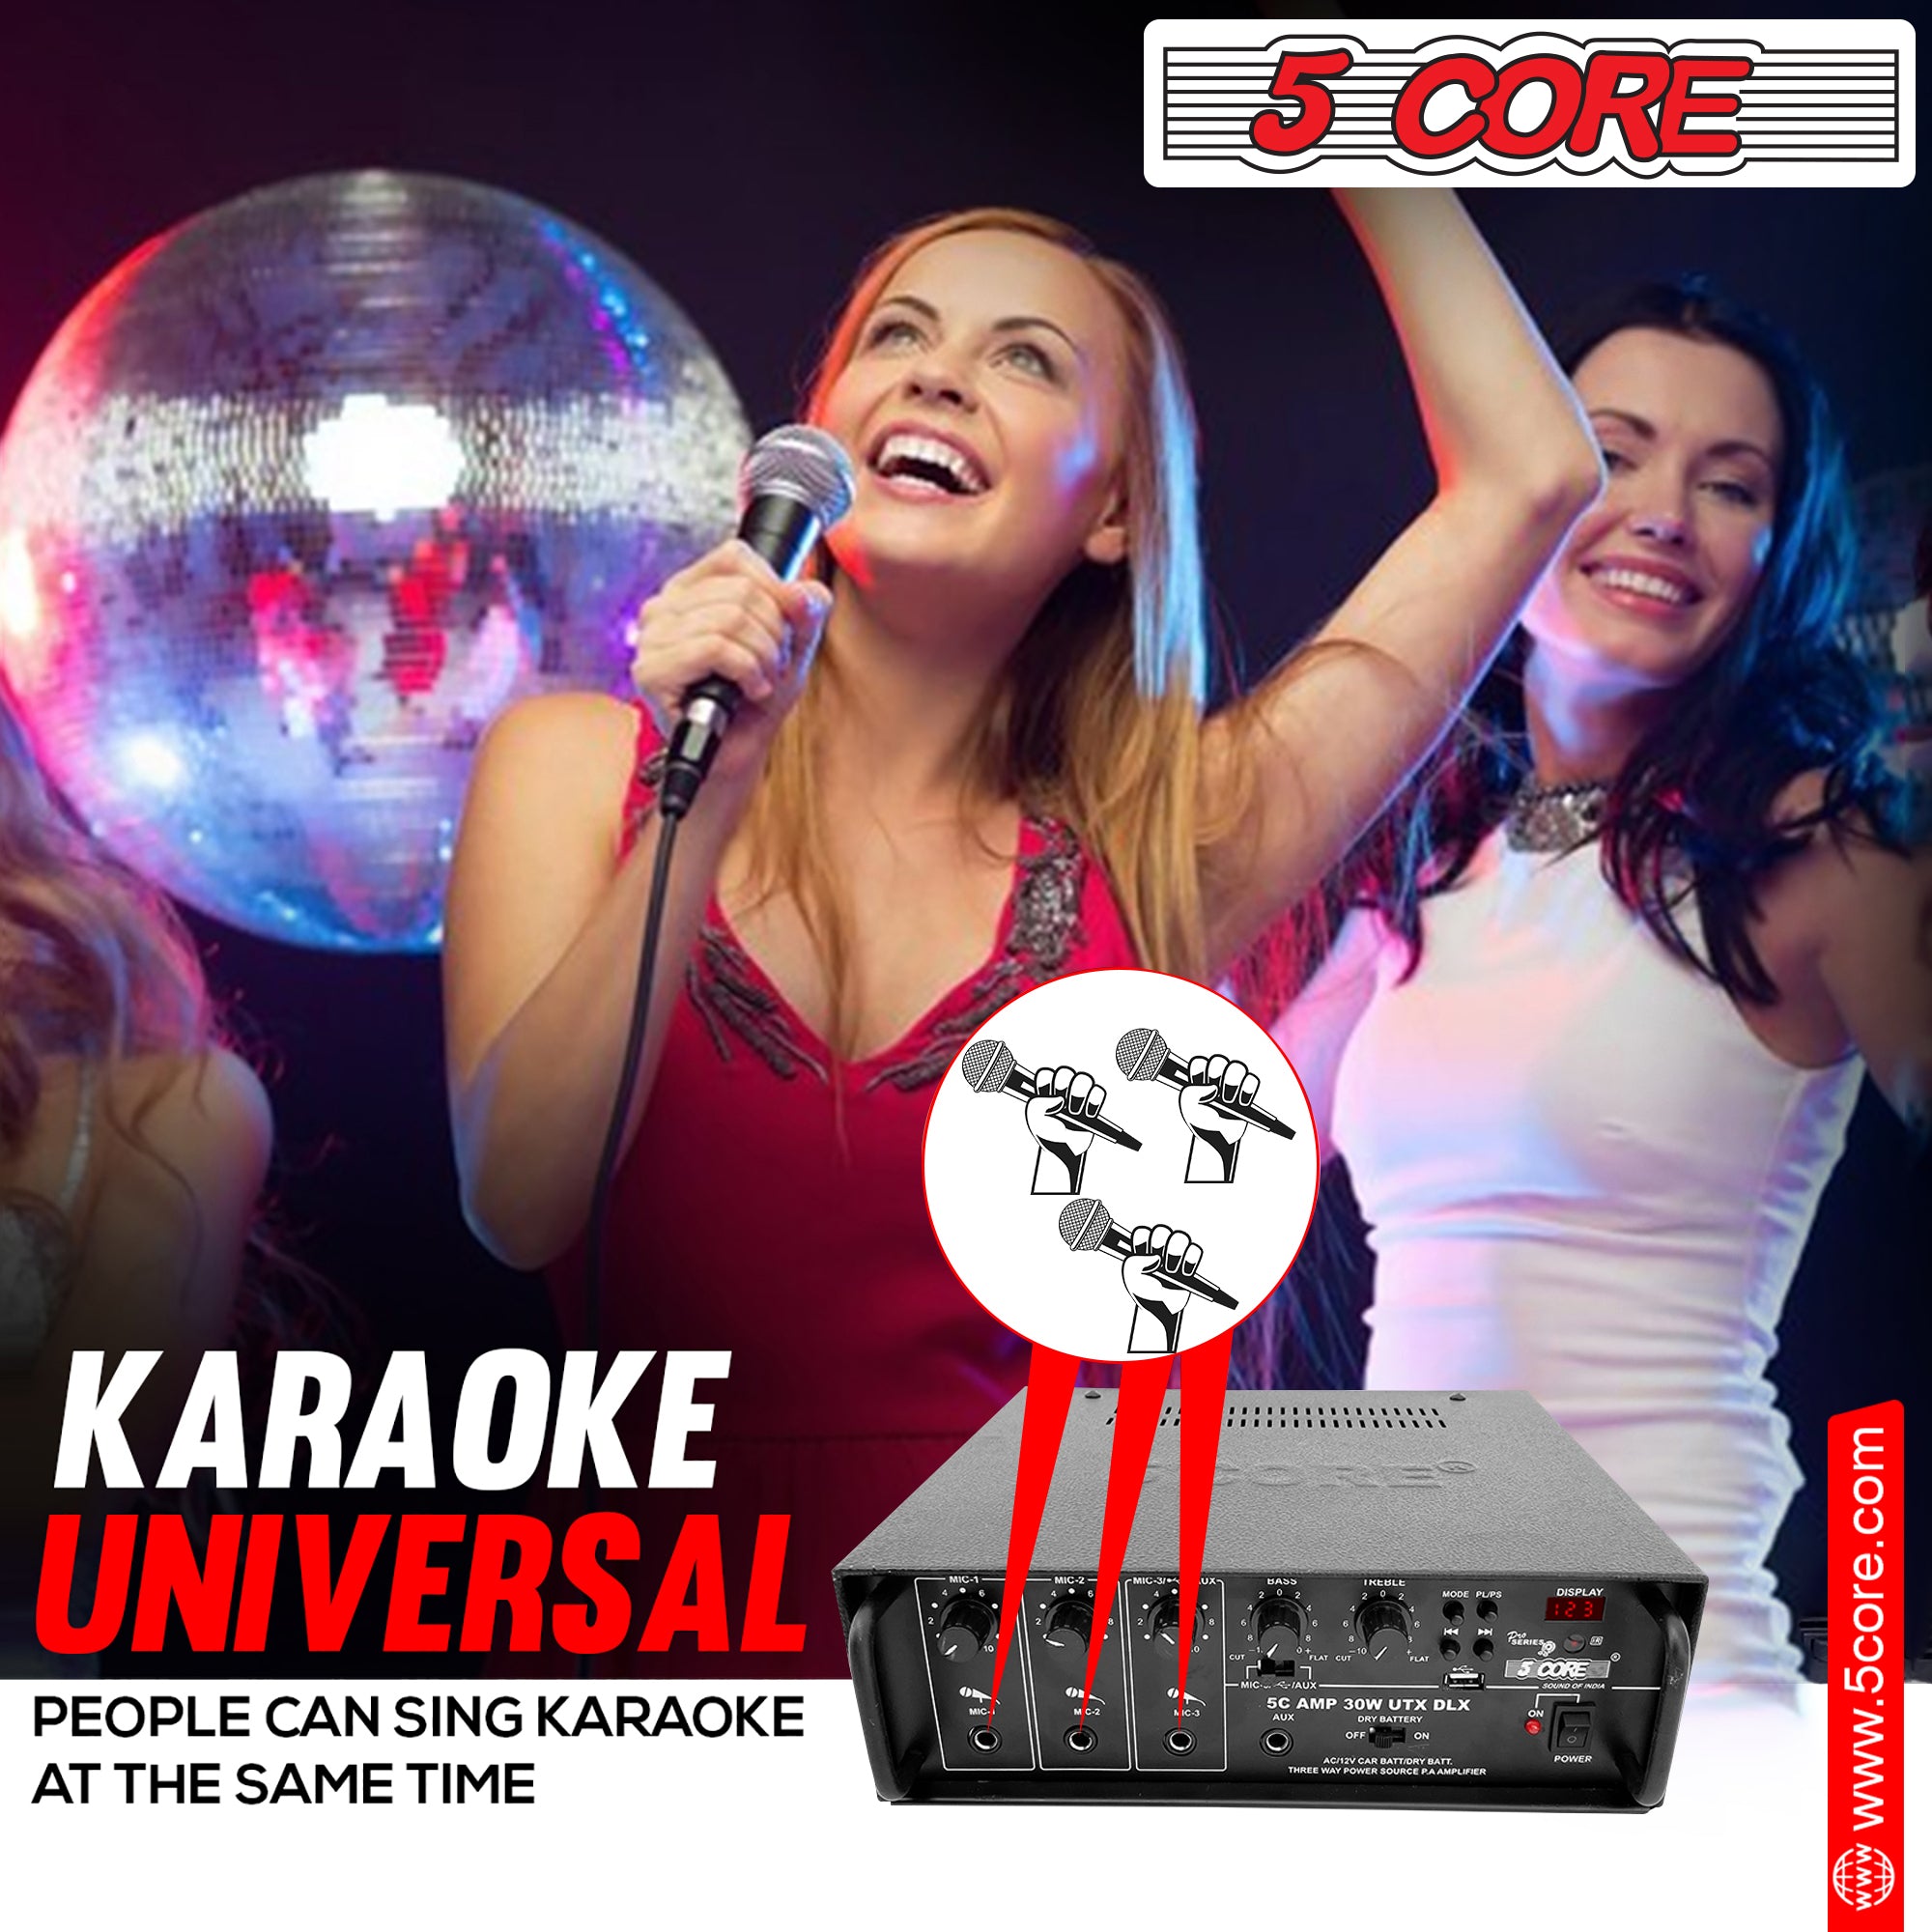 people can sing karaoke at the same time with this amplifier